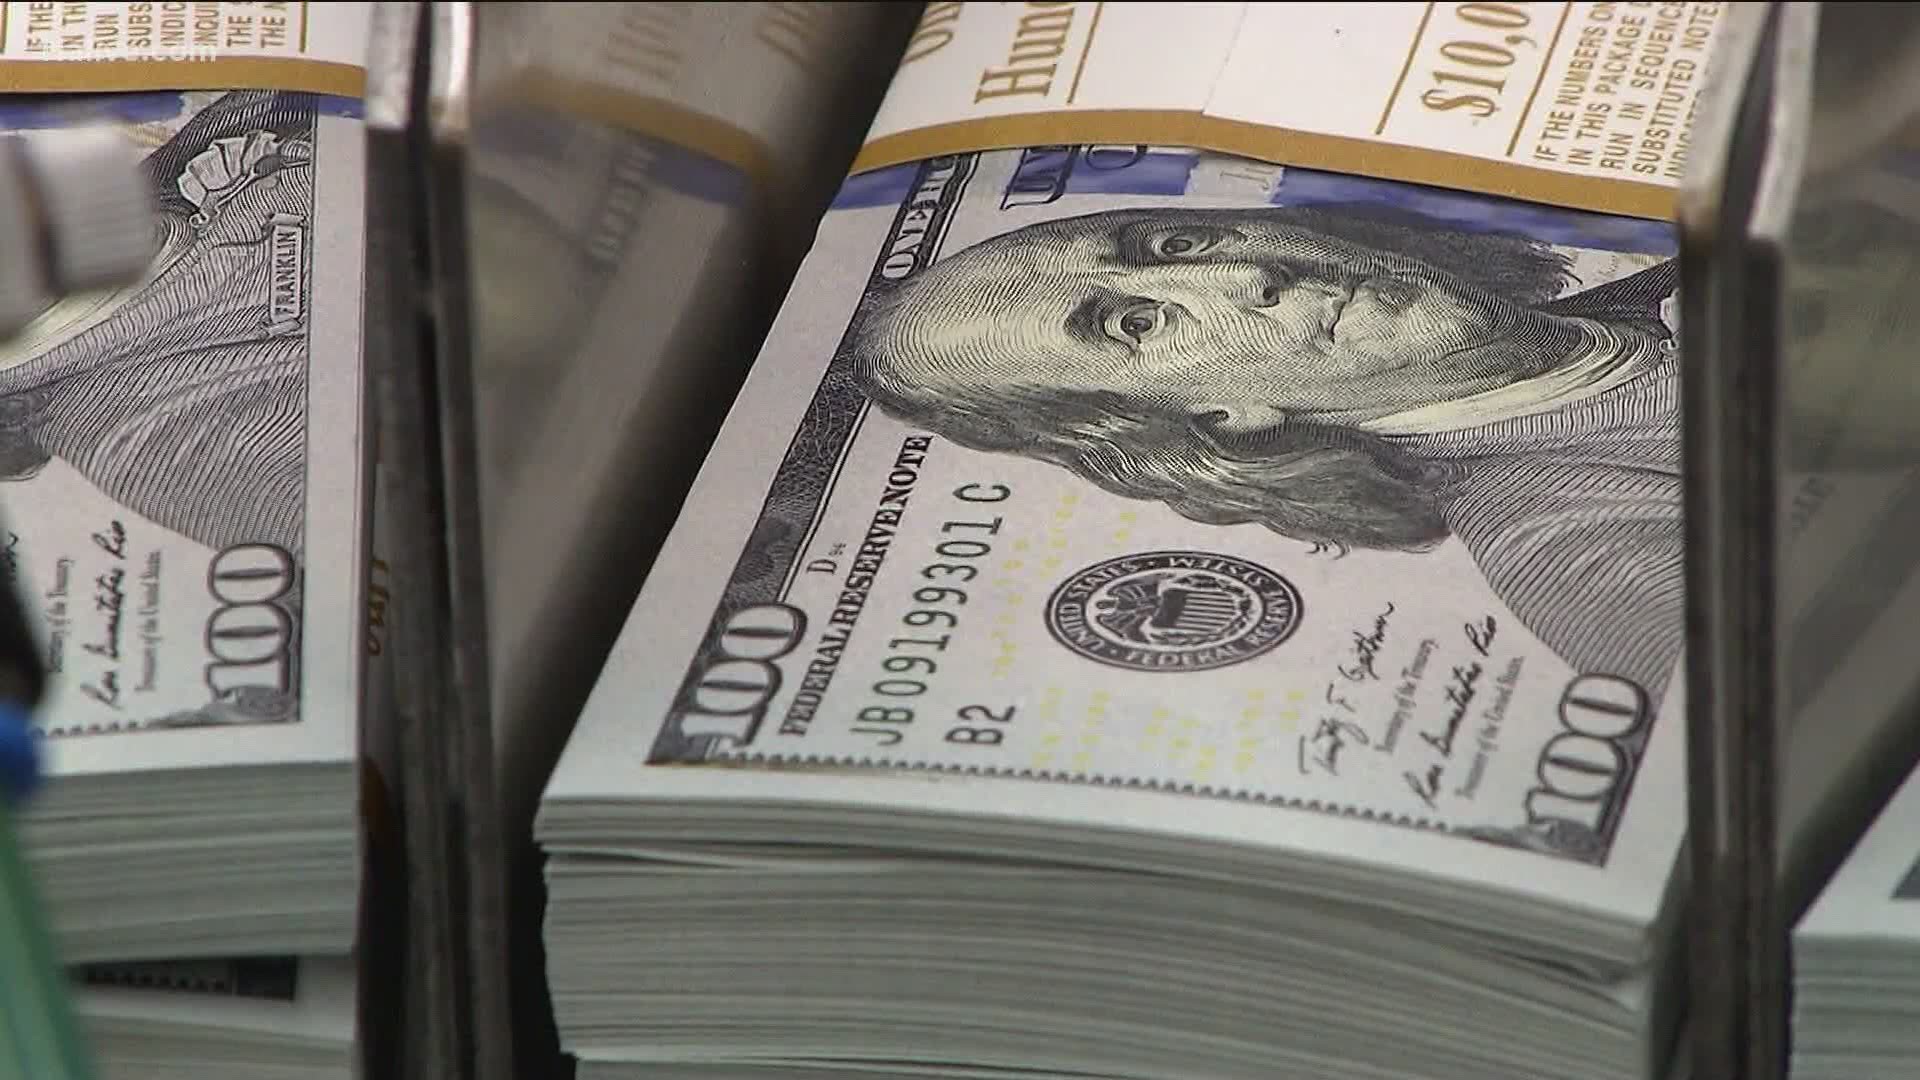 Where's my money? That's the top question 11Alive is getting from people about the stimulus checks.